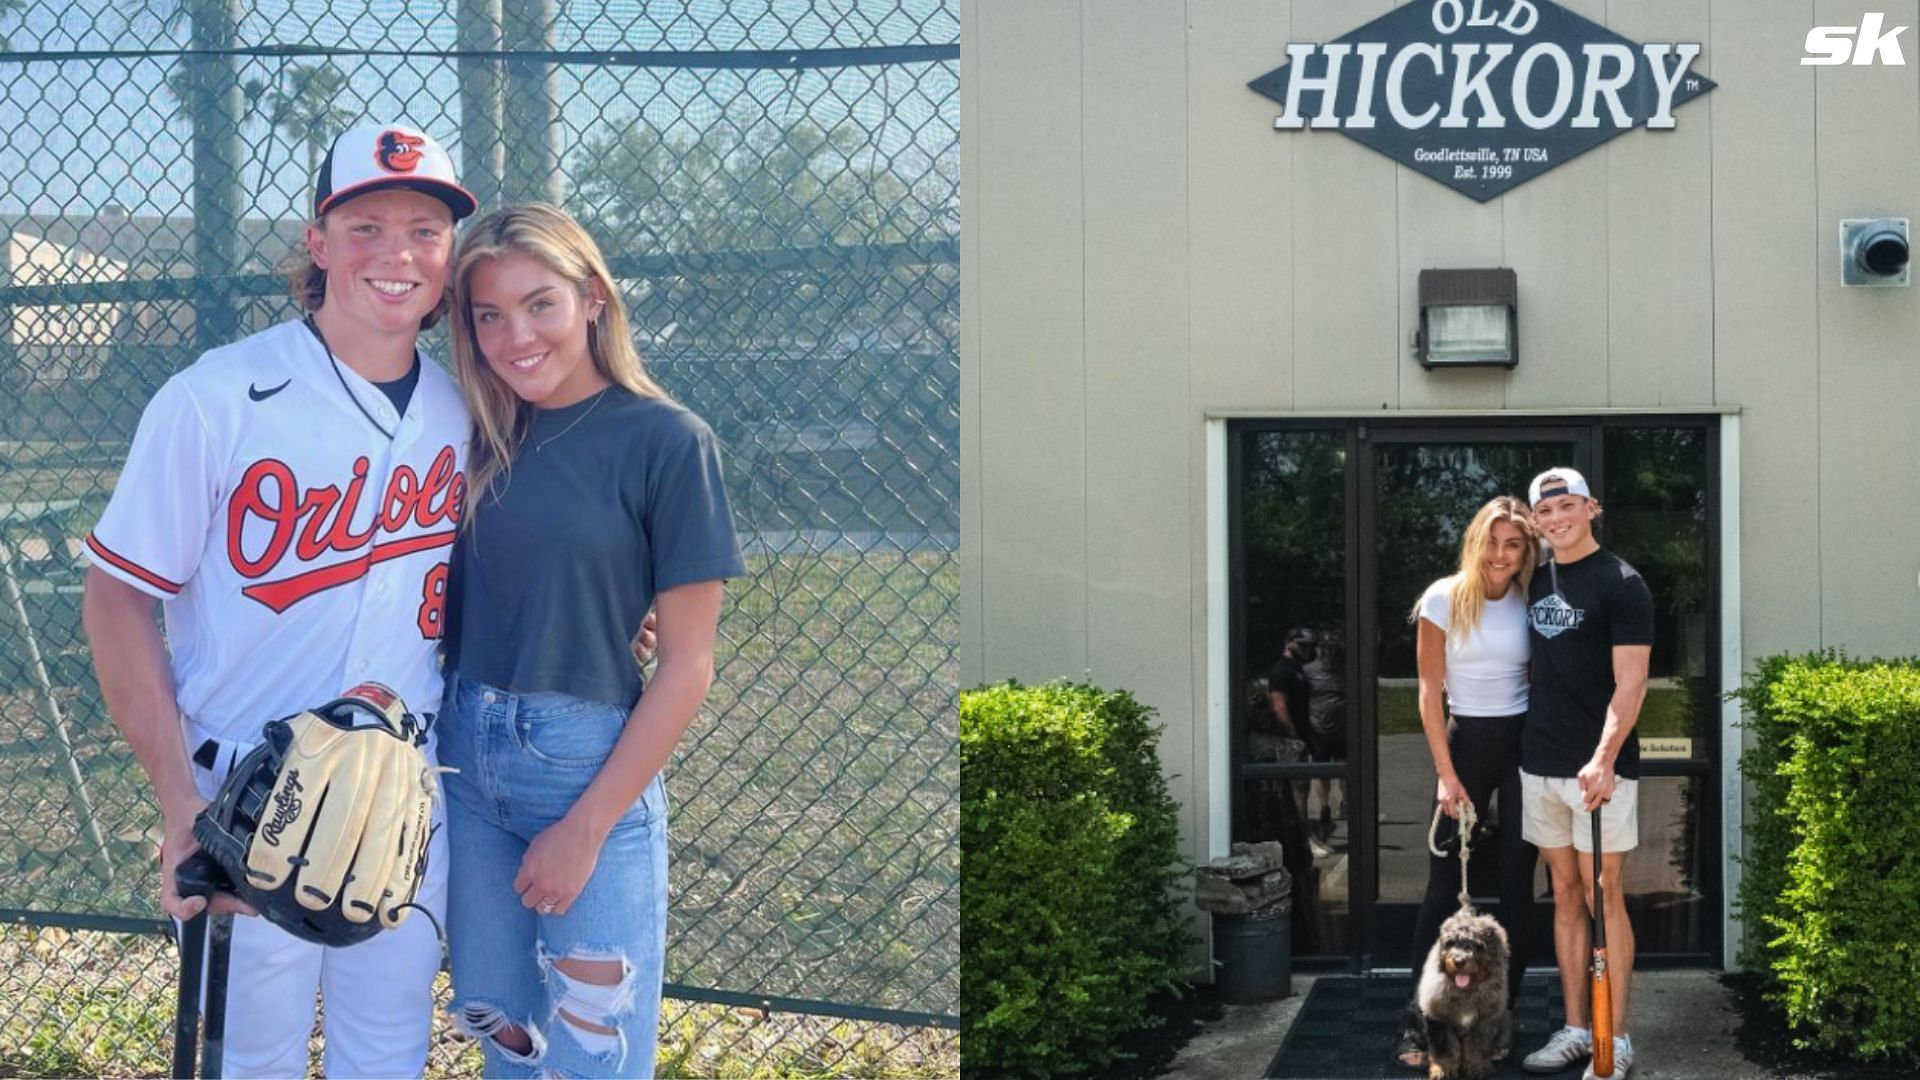 Jackson Holliday &amp; wife Chloe visit to Old Hickory Bat Co.